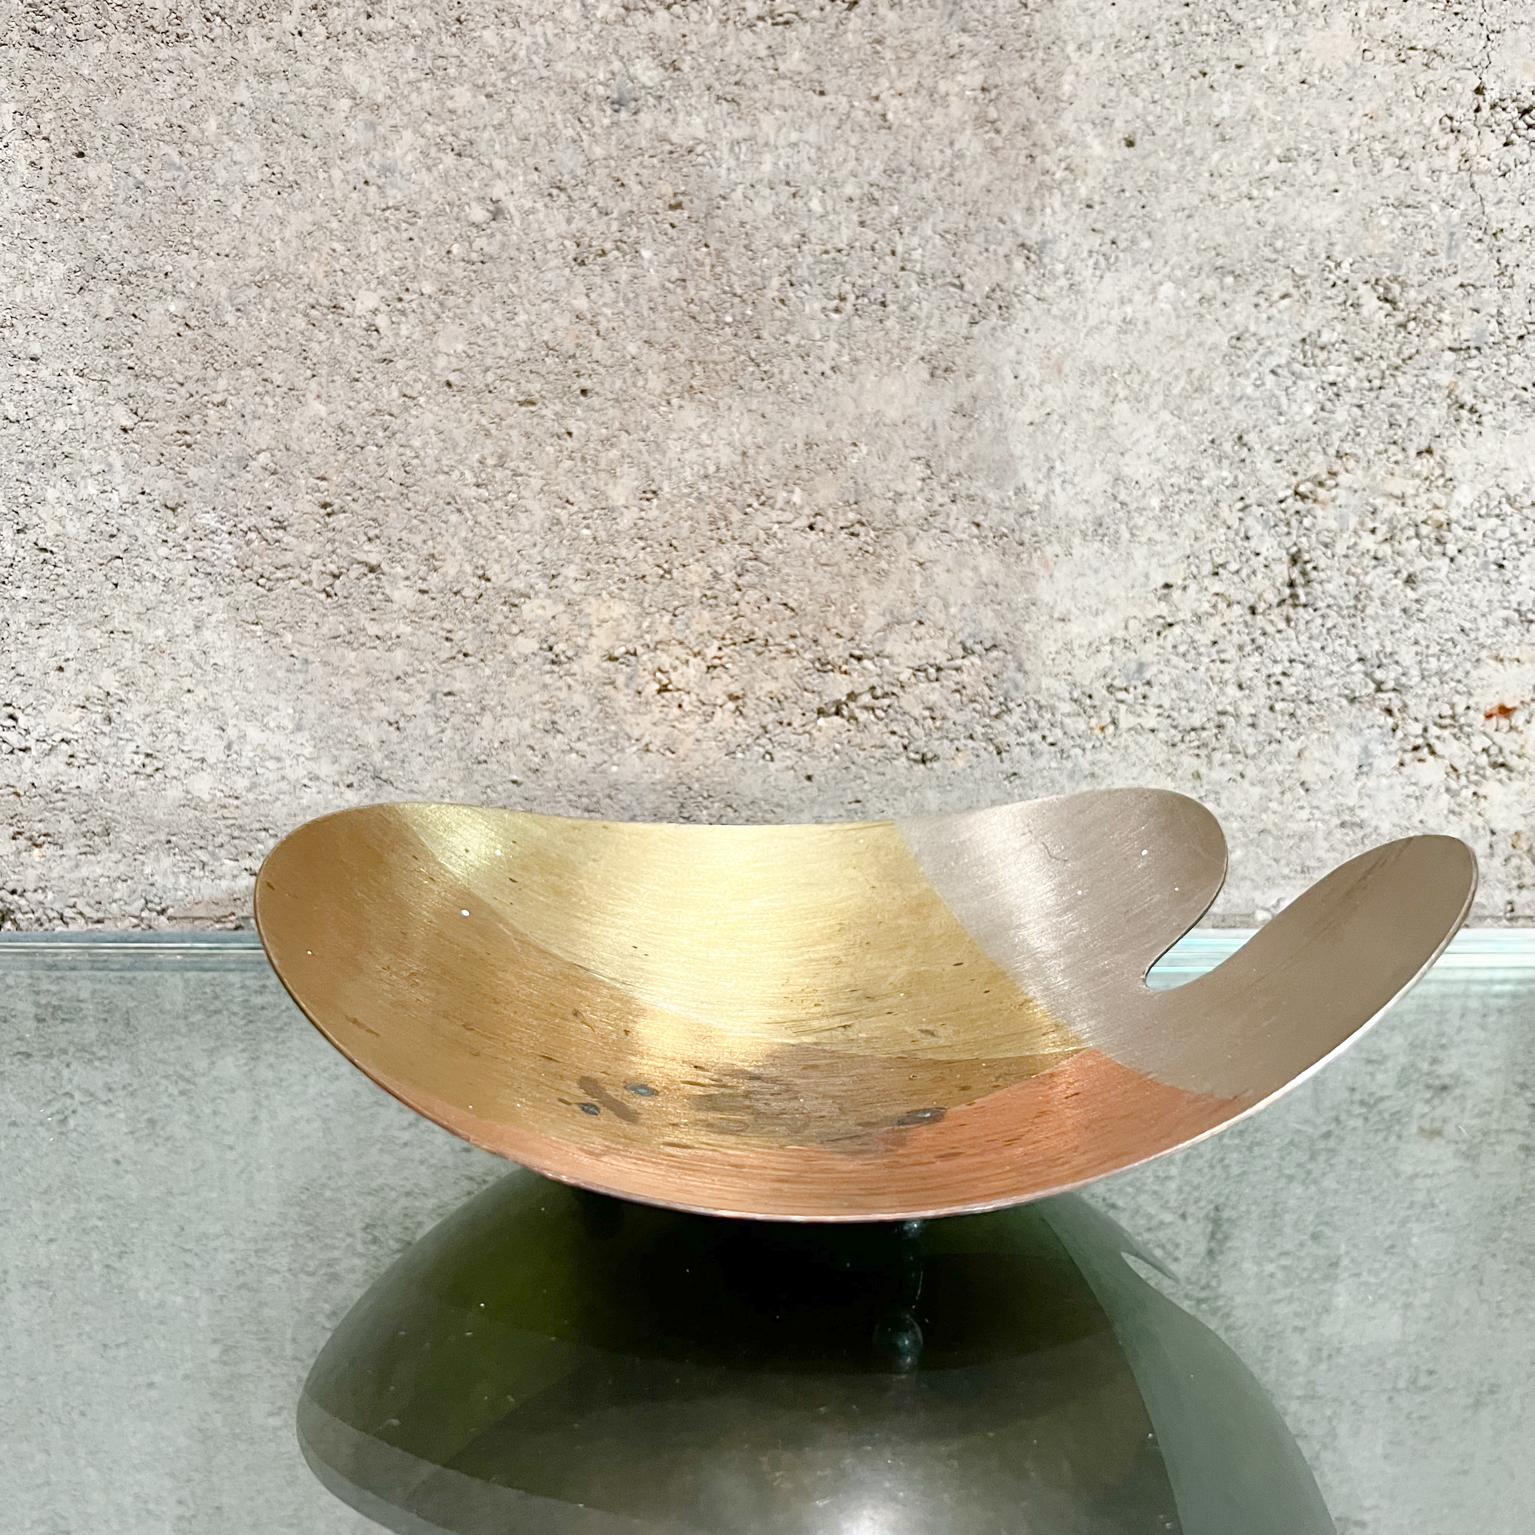 1970s Modernism Mexico Organic Sculptural Footed Dish Mixed Metal 1